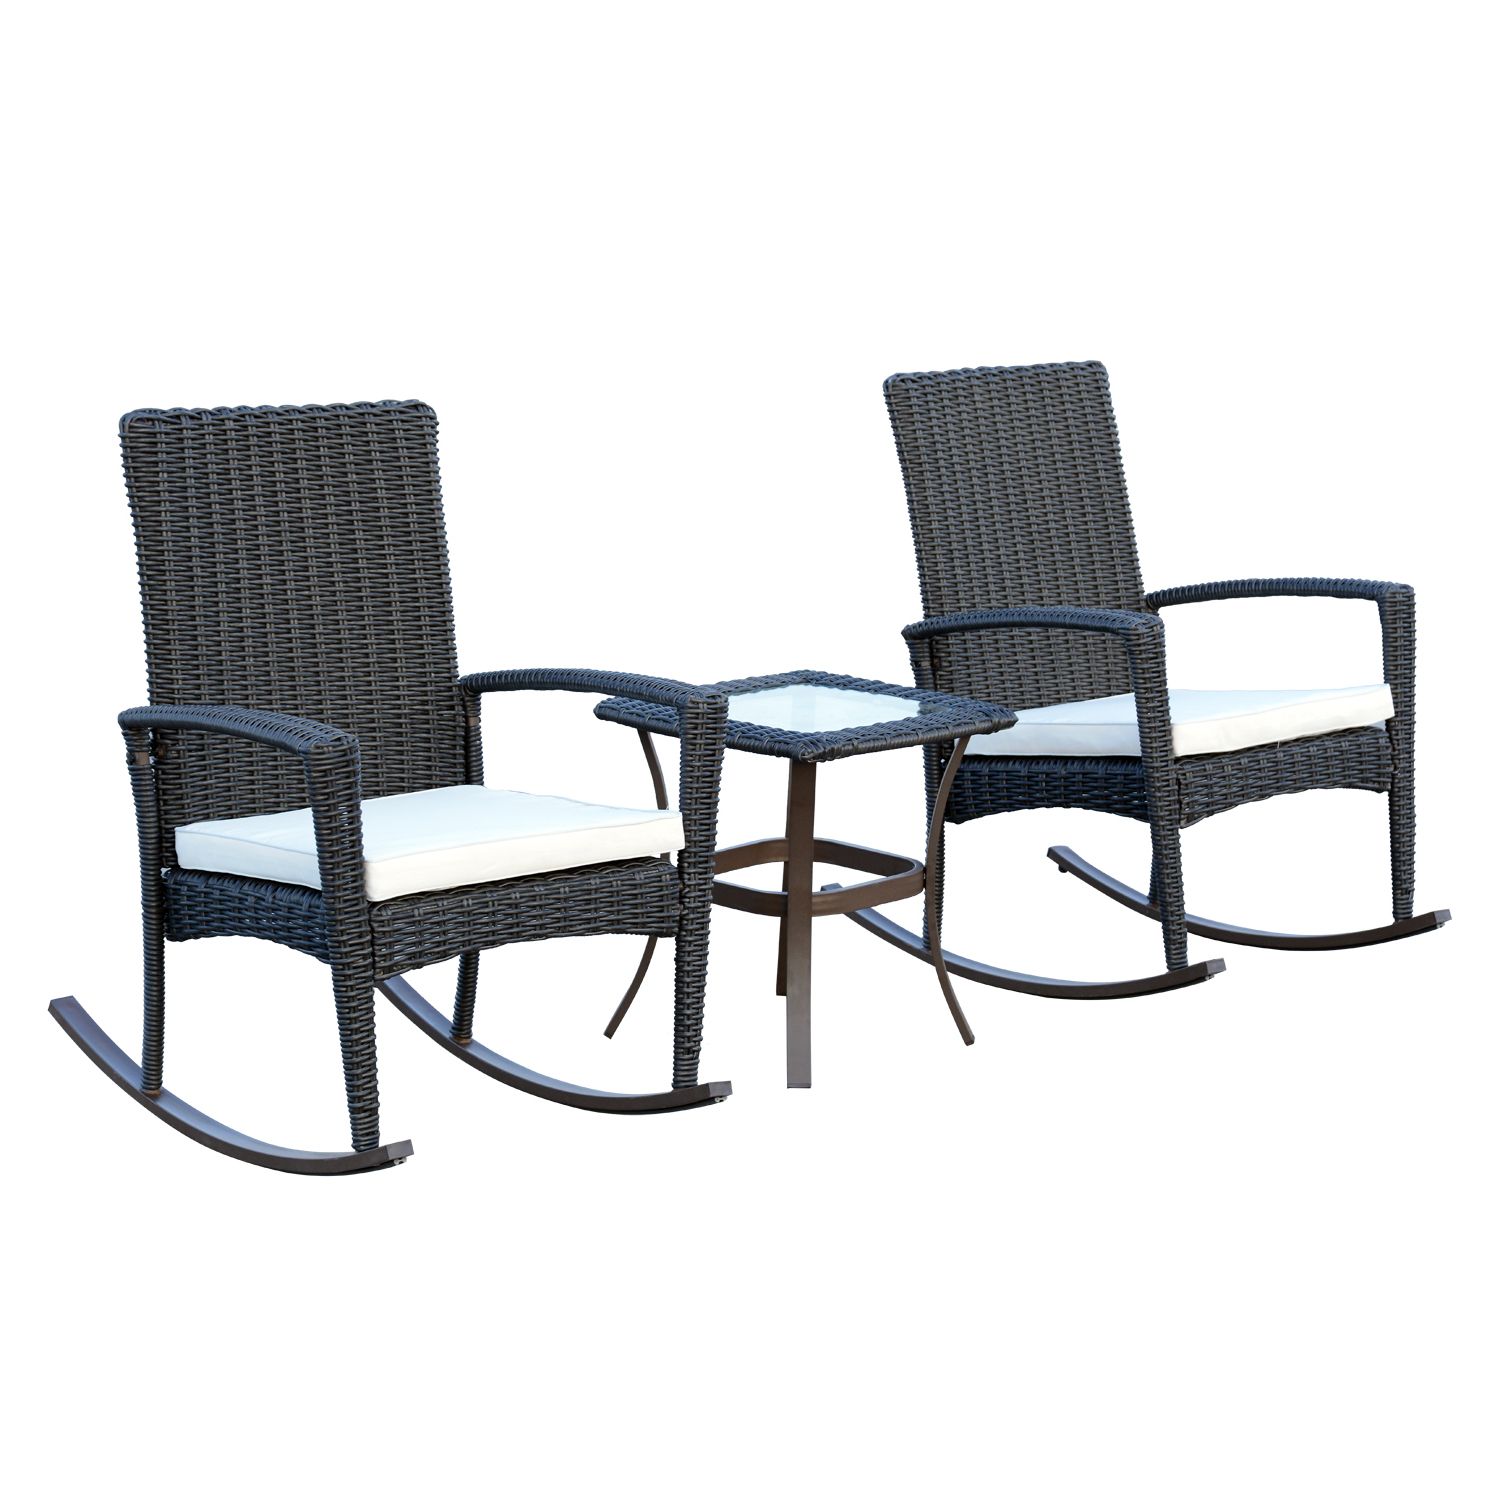 Outsunny 3pcs Rattan Rocking Chair Table Set Patio Bistro Set Dark Grey With Regard To Well Known Outdoor Rocking Chair Sets With Coffee Table (View 1 of 15)